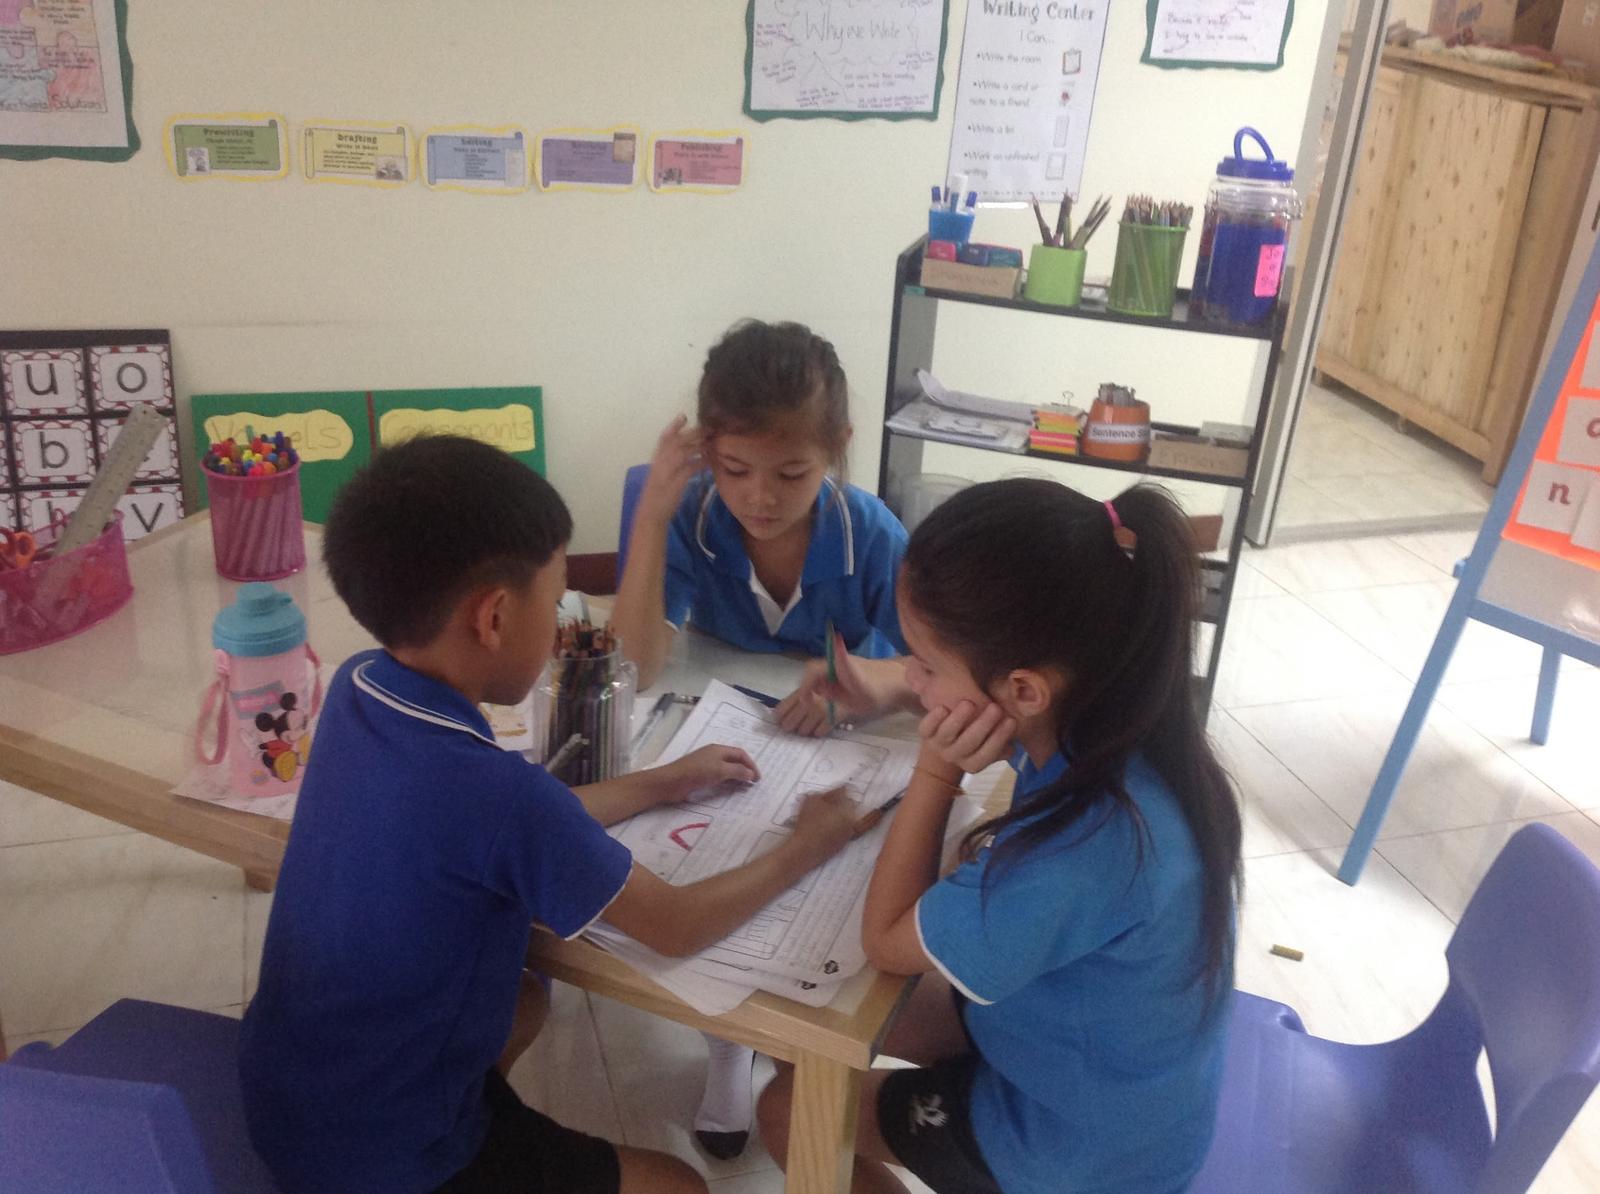 Shared writing is an activity that usually help my students work as a team.